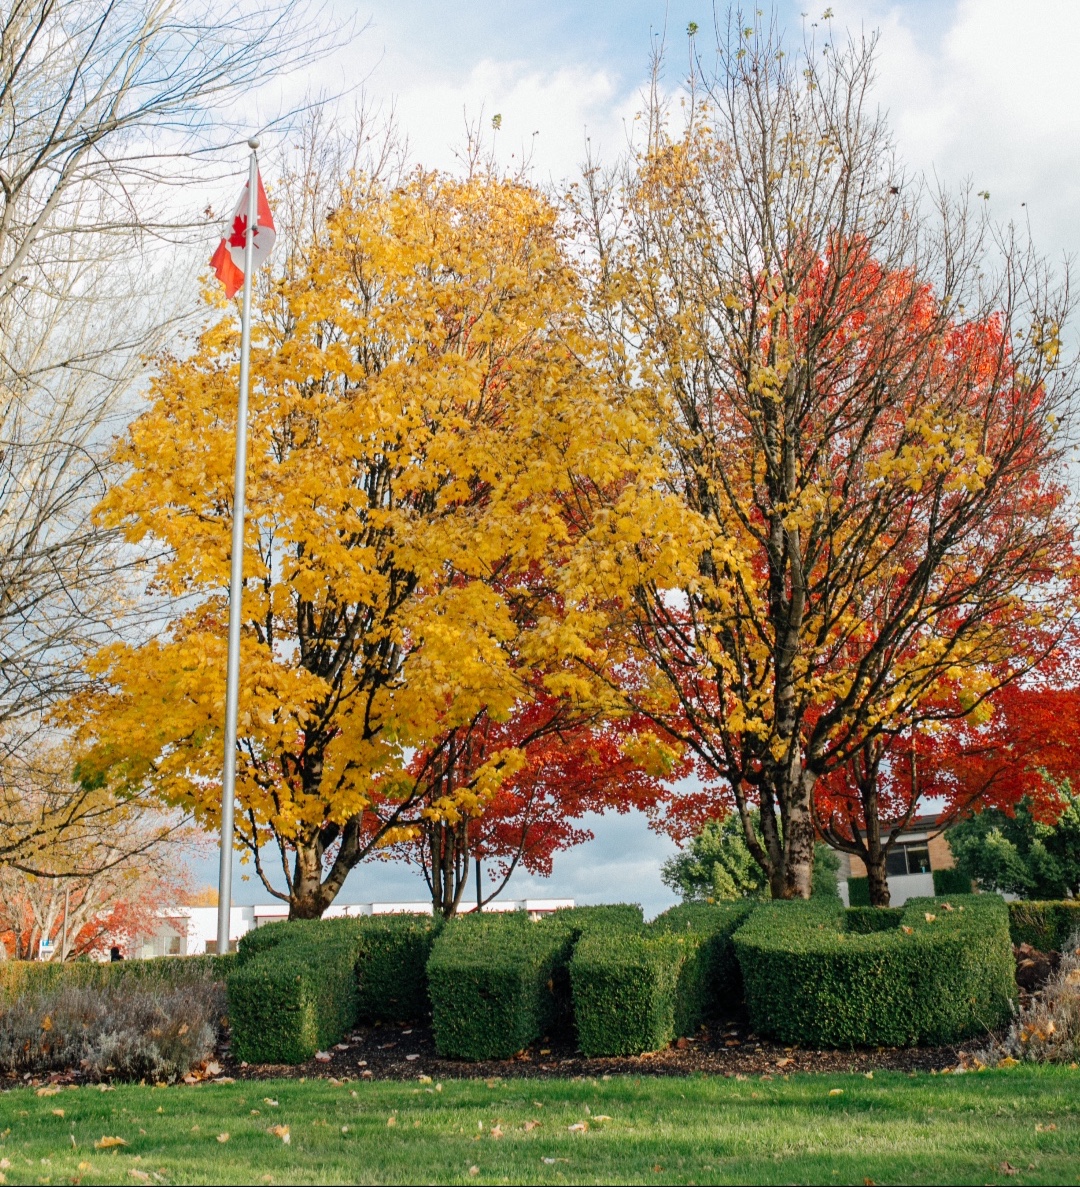 Today, we pause to reflect on the sacrifices of the brave men & women who have served our country and made the ultimate sacrifice for our freedom. On behalf of our University community, we extend our deepest gratitude to all those who have served our country. #Lestweforget